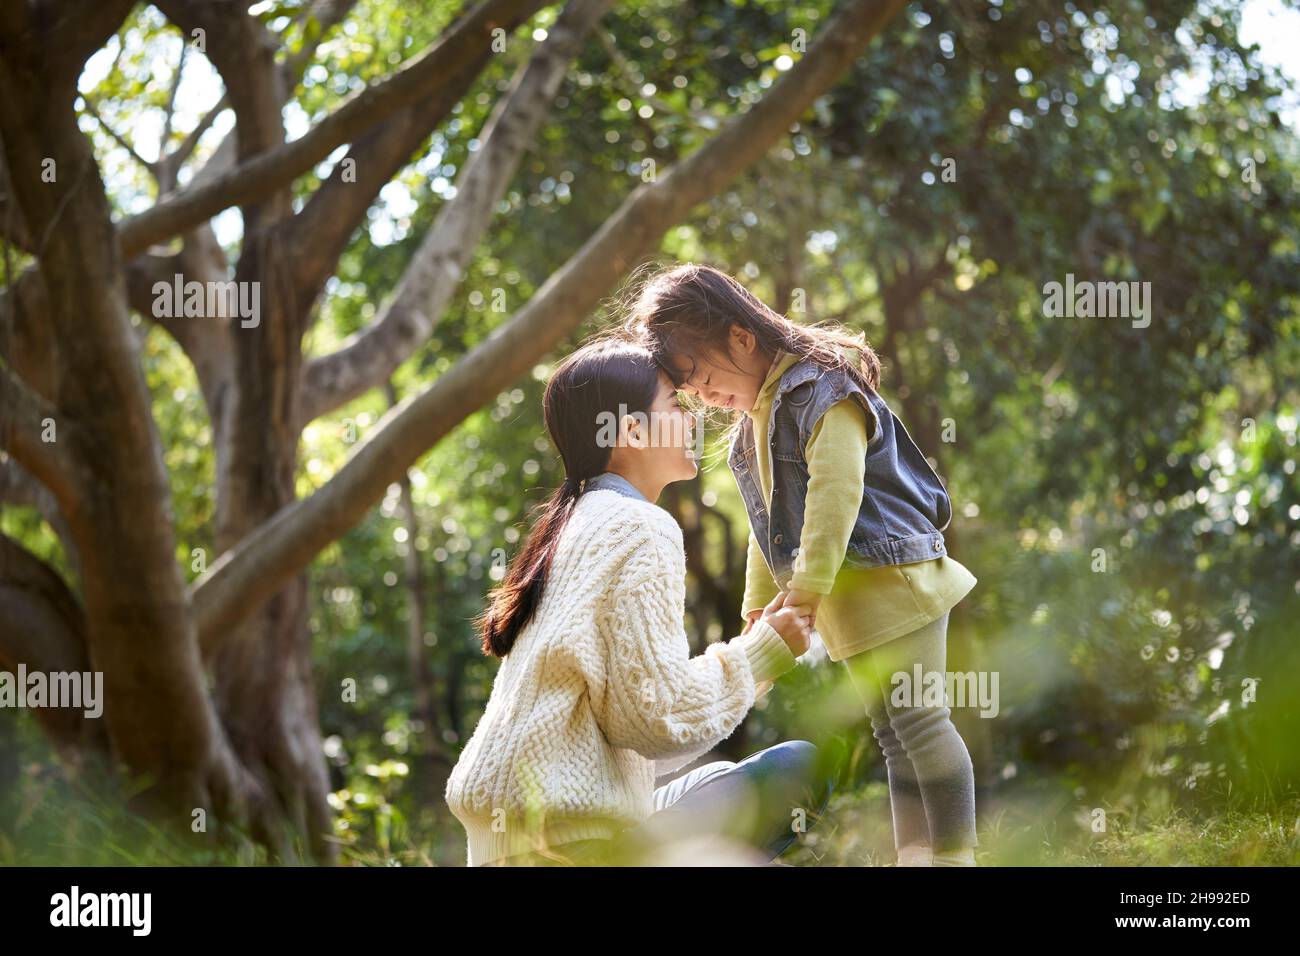 young asian mother and daughter enjoying a good time outdoors in city park Stock Photo